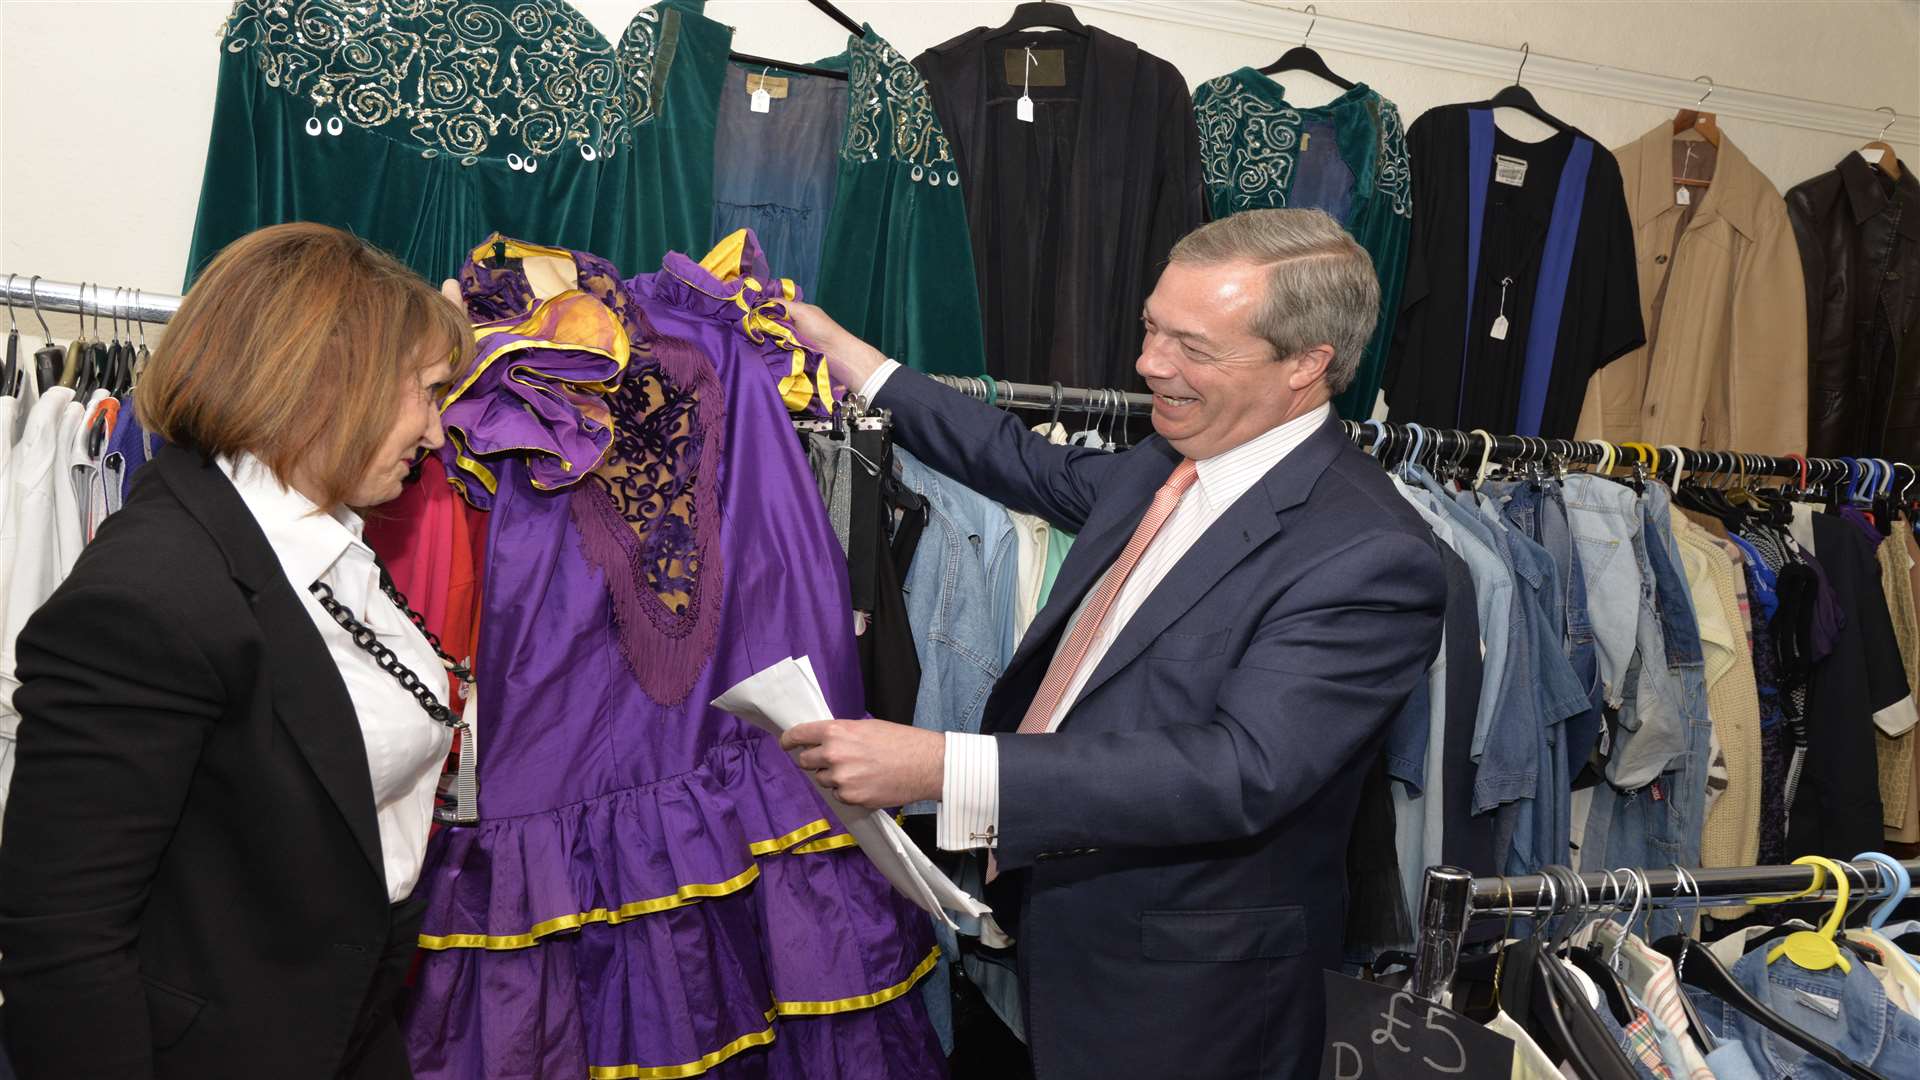 Mr Farage browses the clothing in Revivals